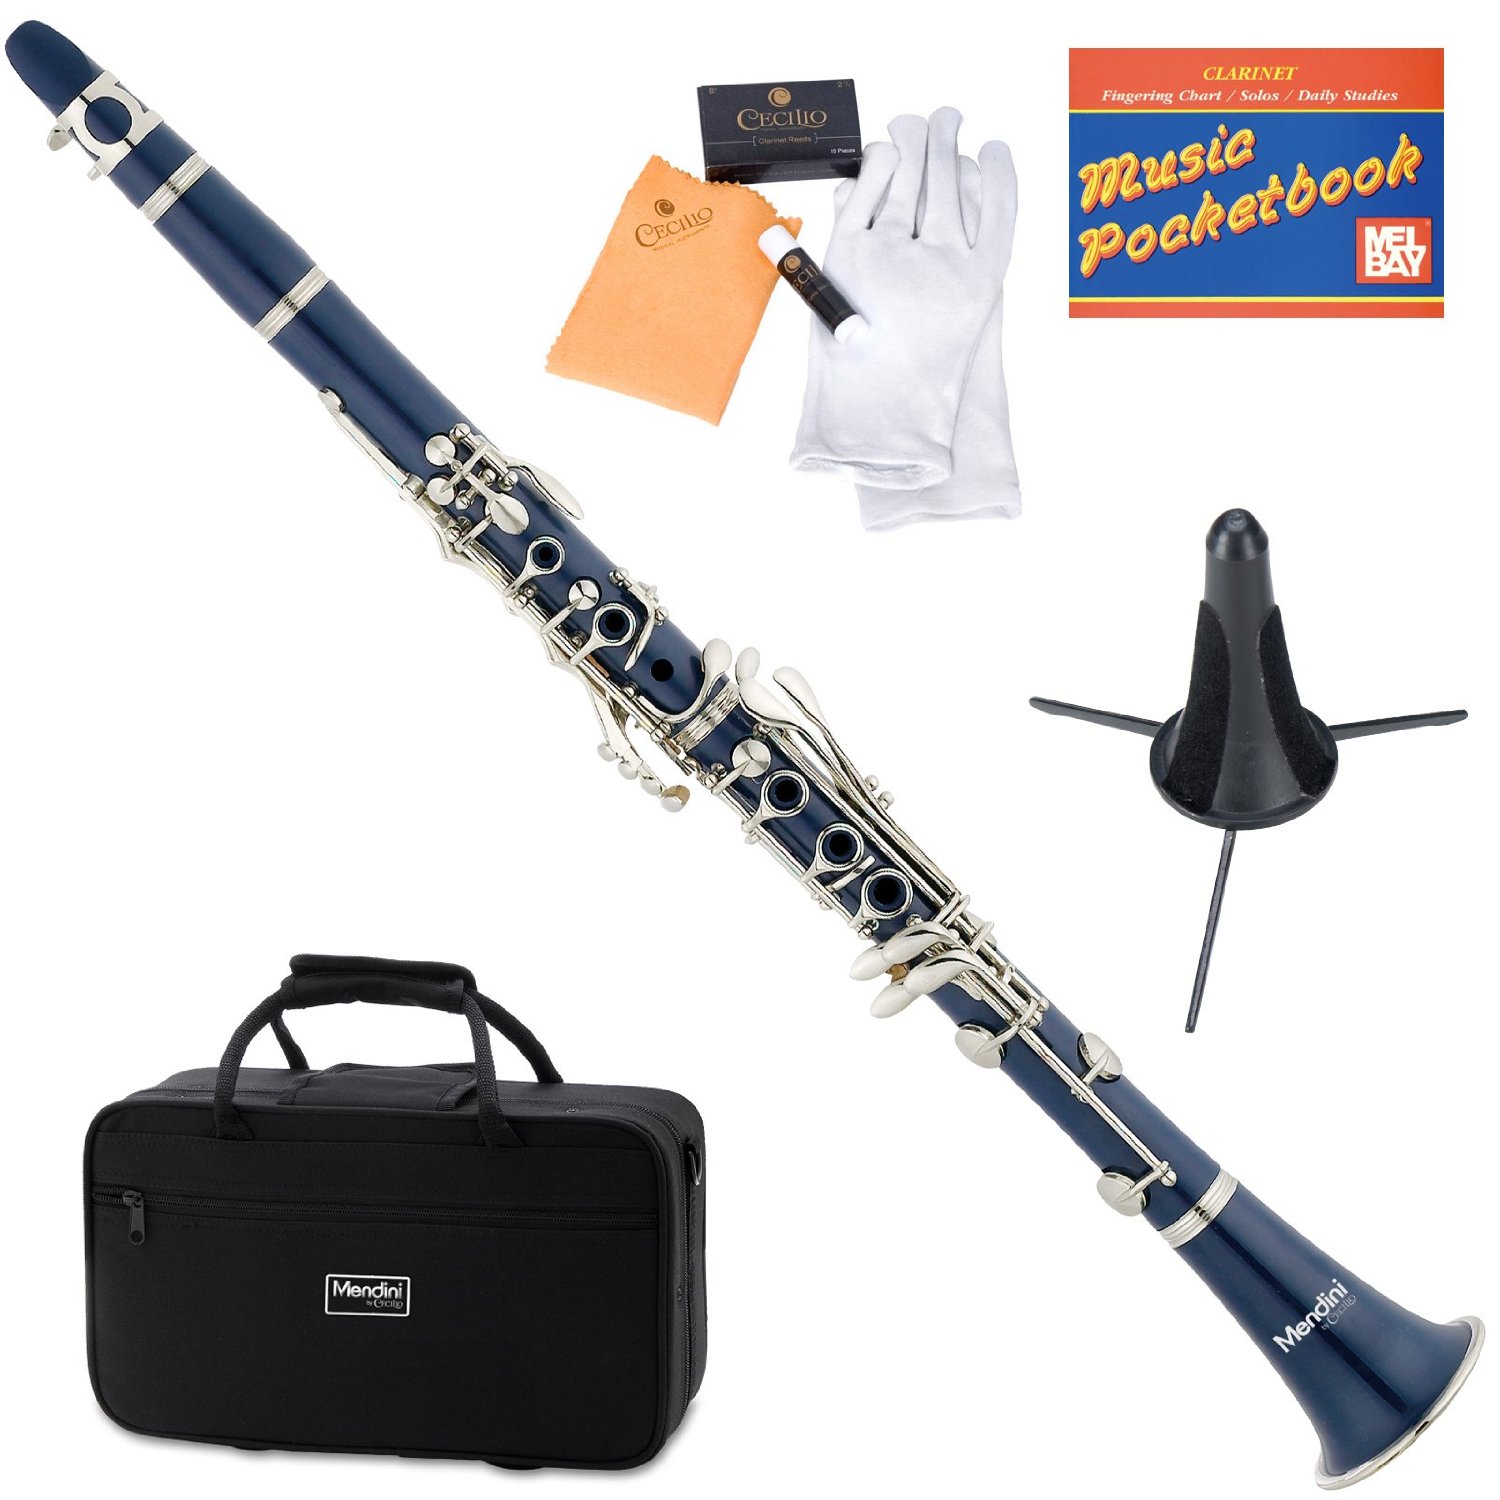 Mendini Mct-Bl+Sd+Pb Blue Abs B Flat Clarinet With Case, Stand, Pocketbook, Mouthpiece, 10 Reeds And More